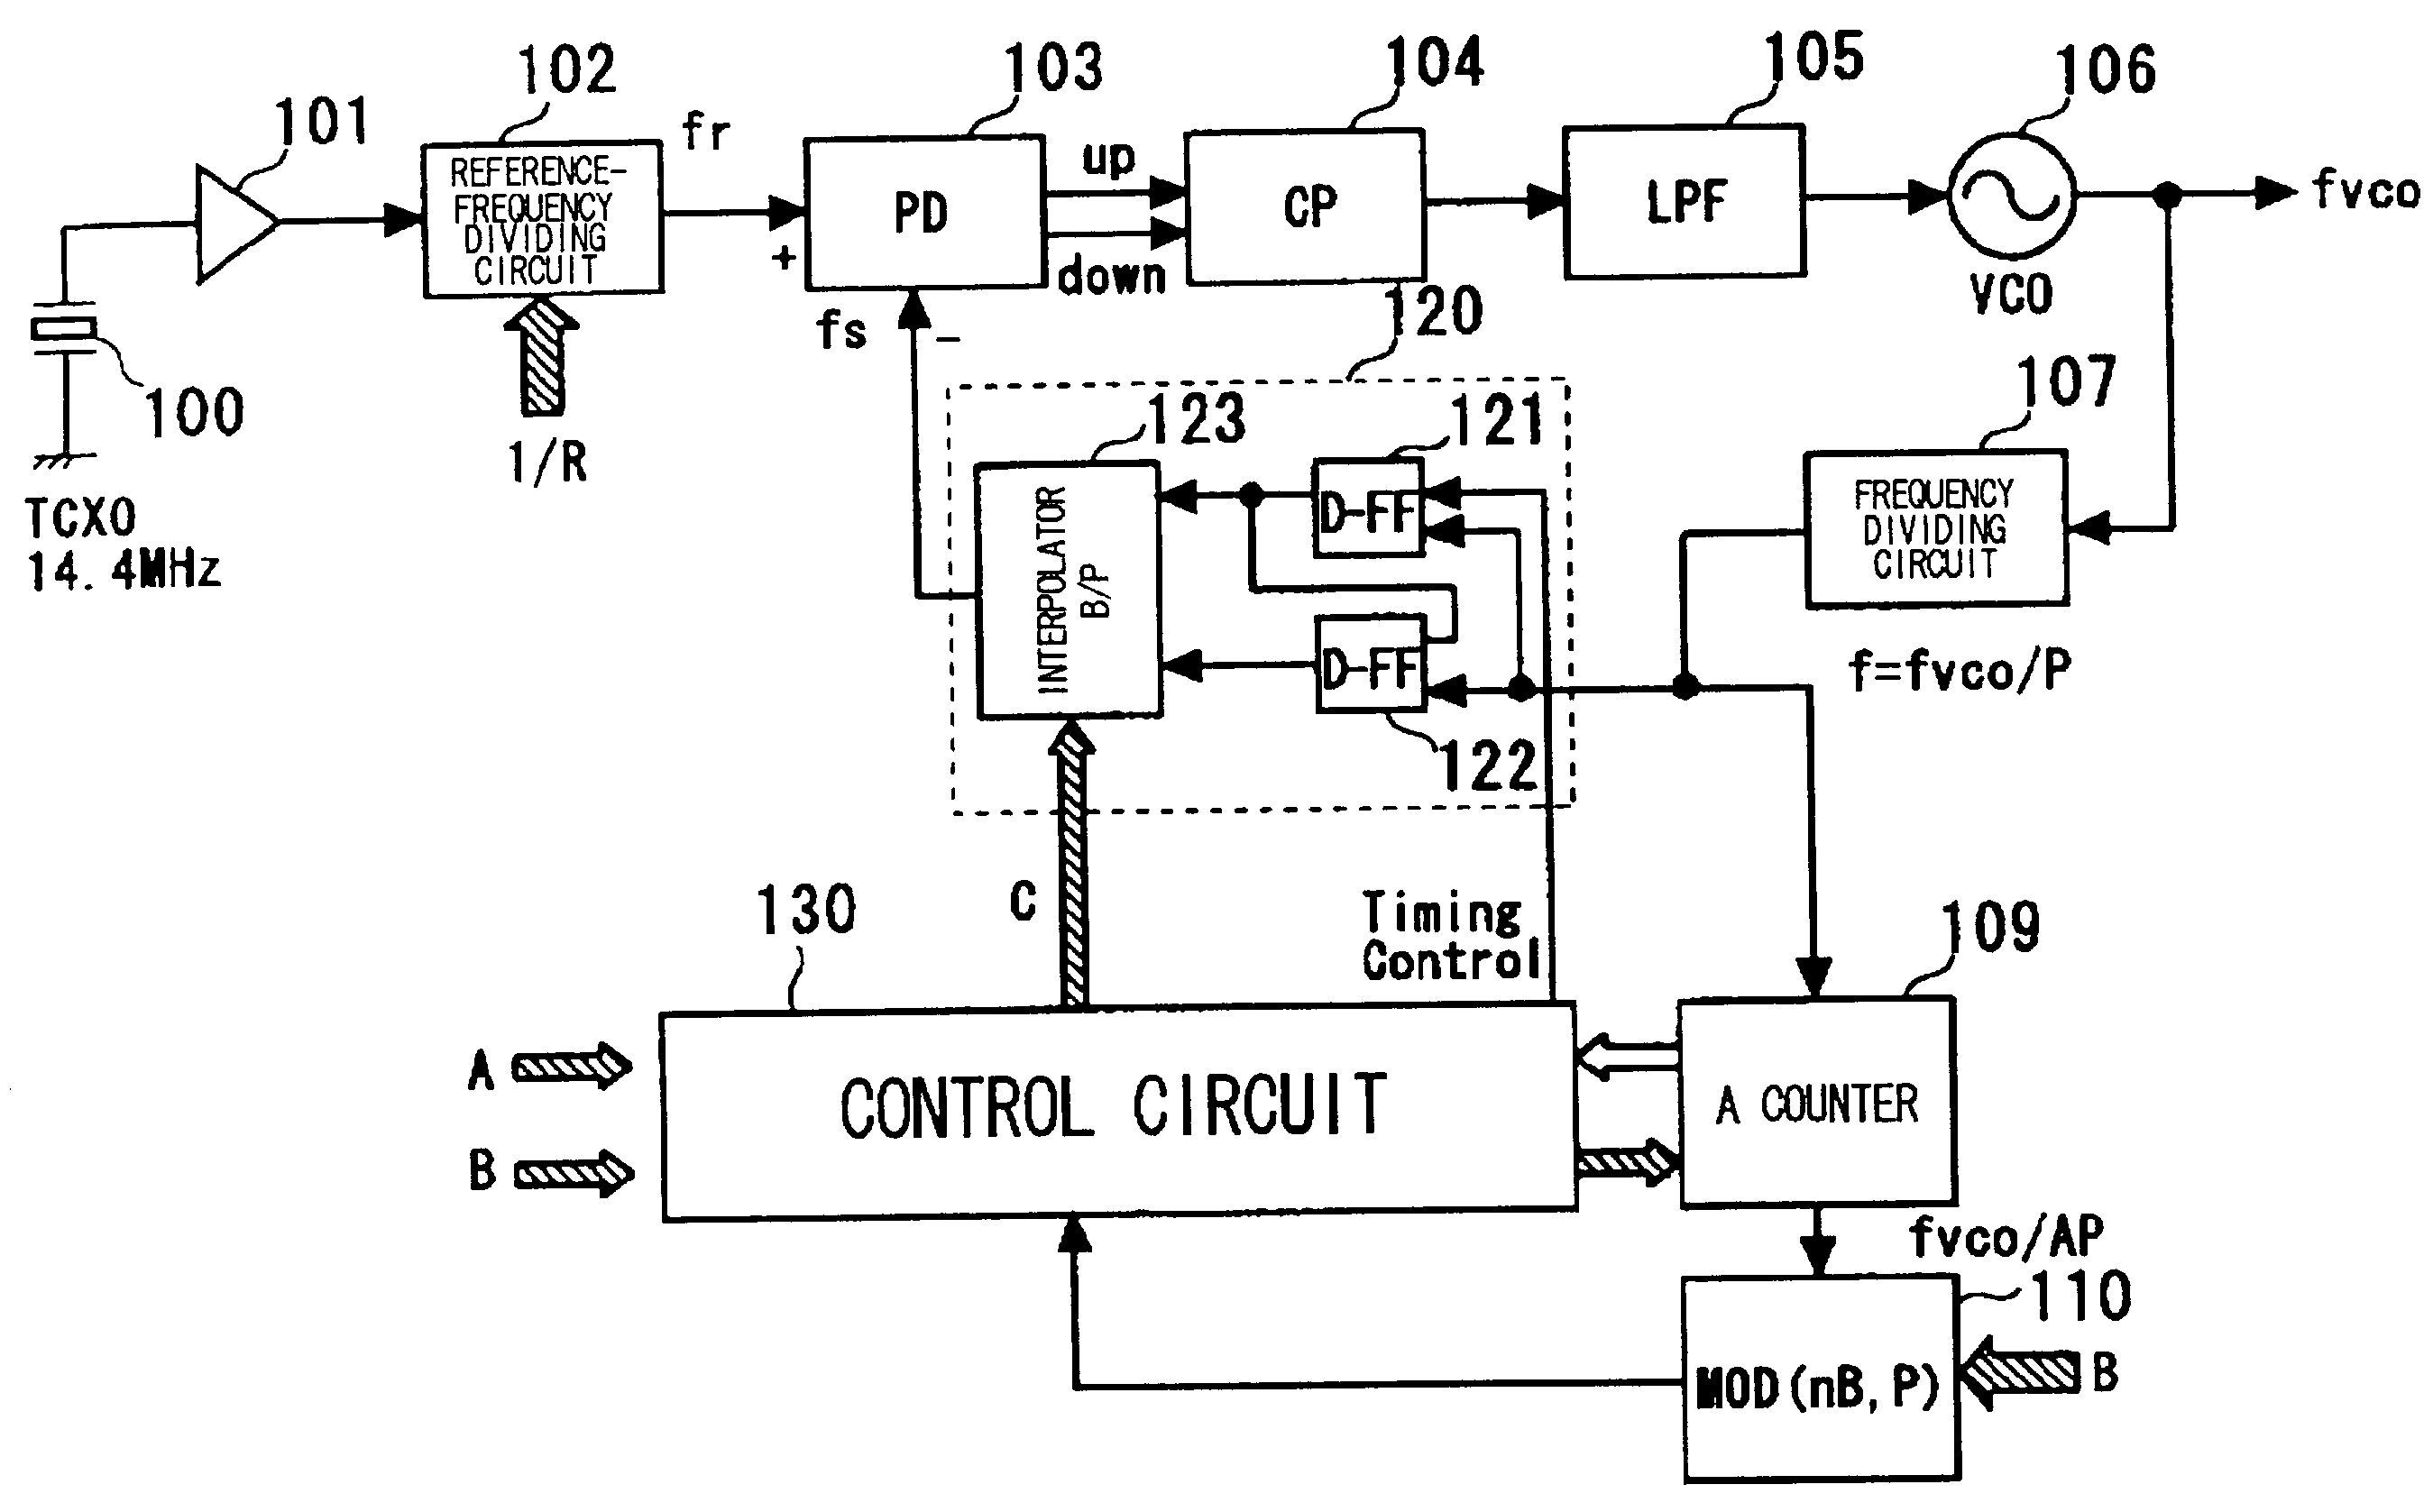 Clock control method, frequency dividing circuit and PLL circuit